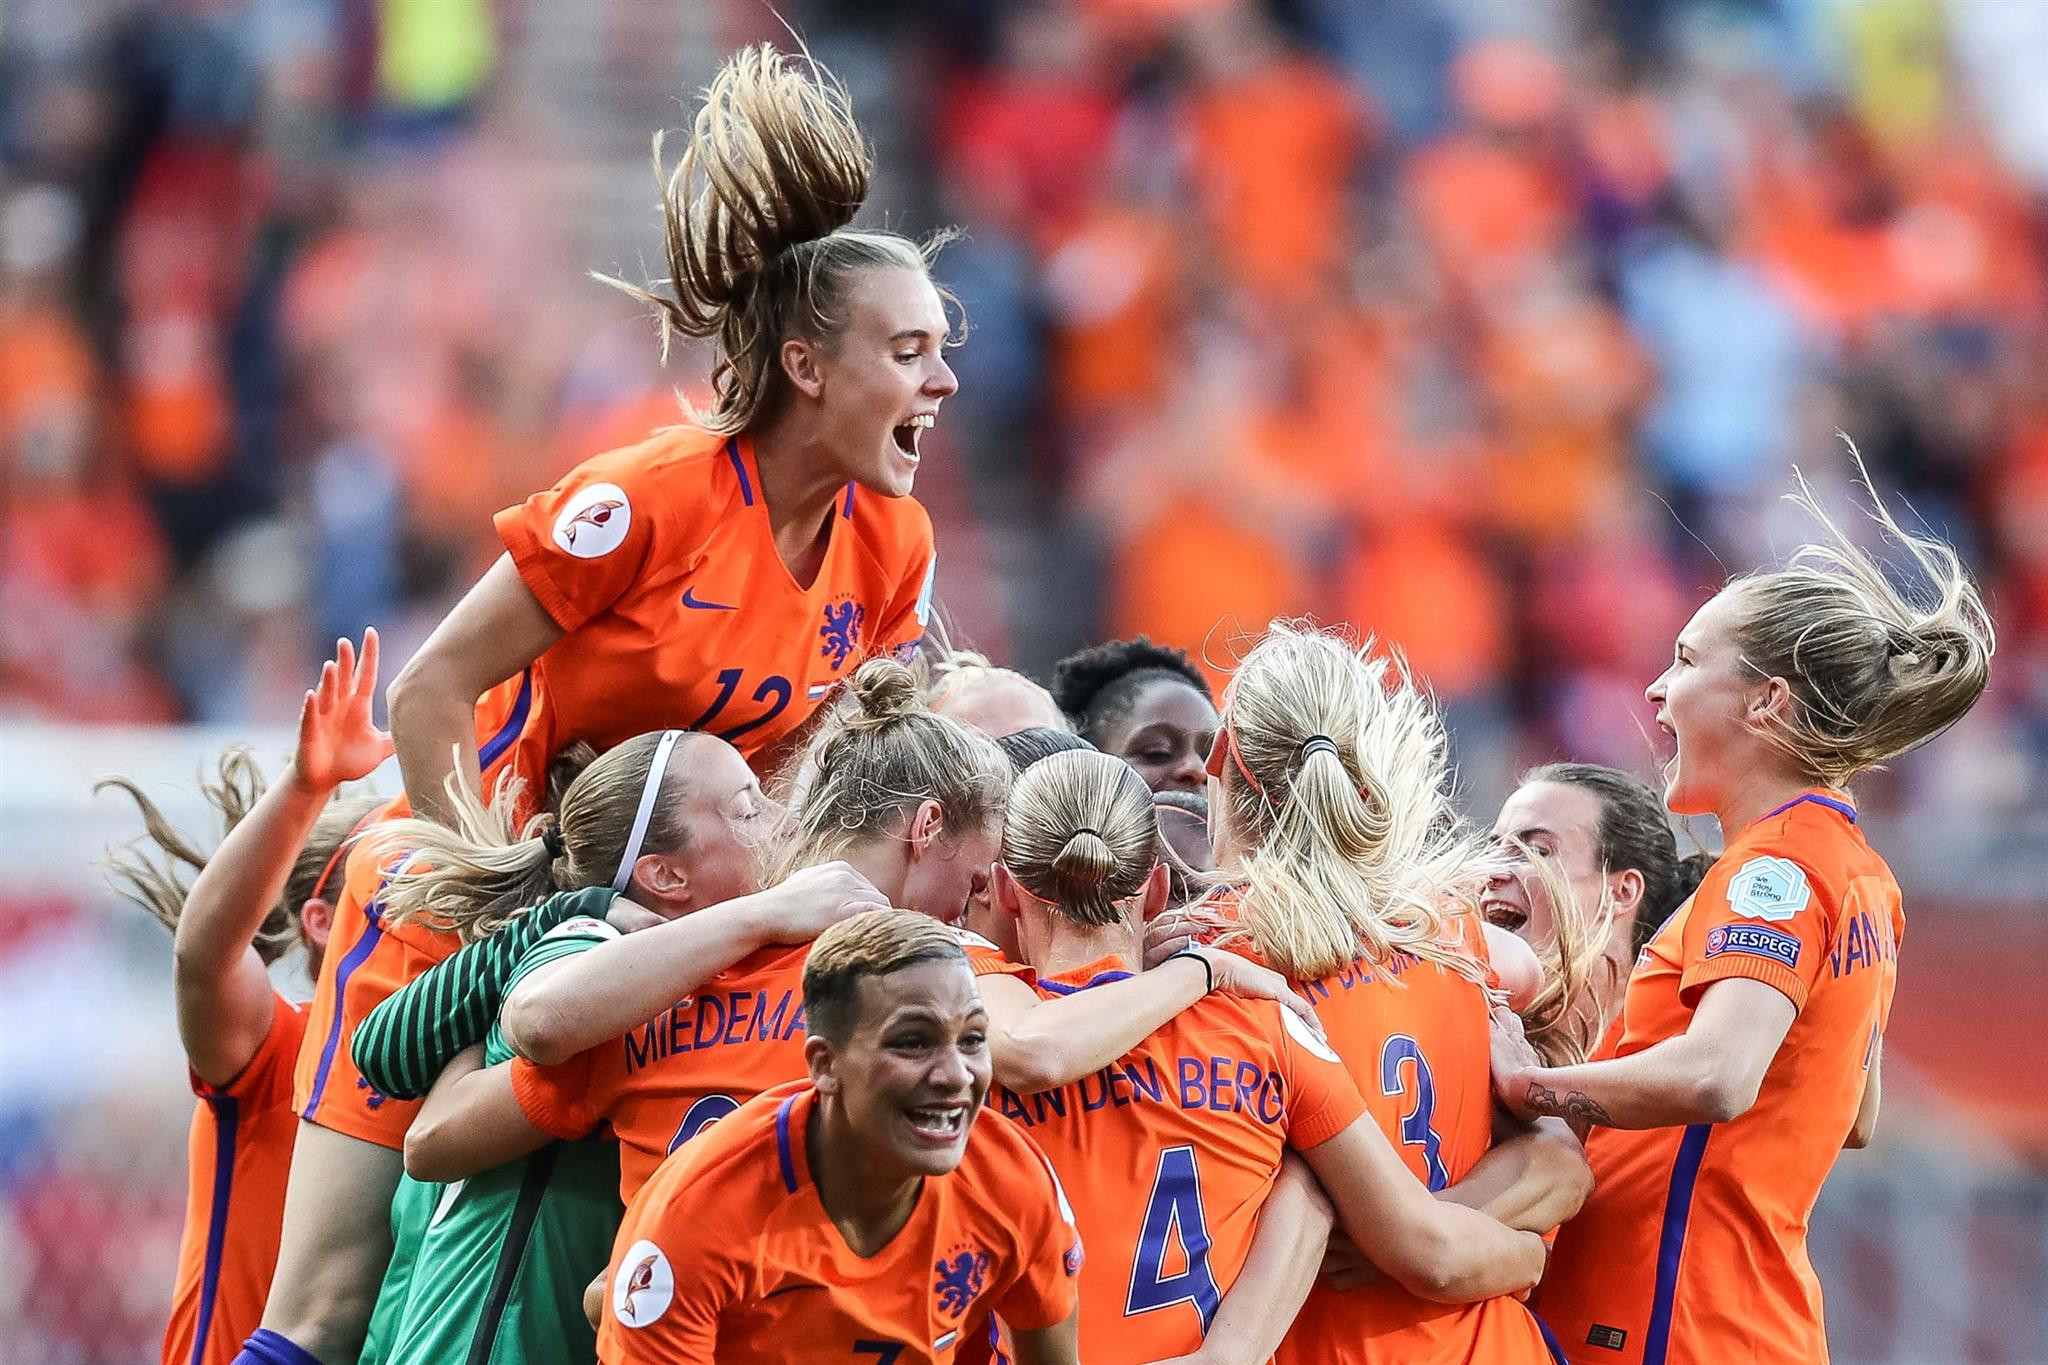 Women's football in The Netherlands received a major boost when the team won the 2017 European Championship ©Getty Images